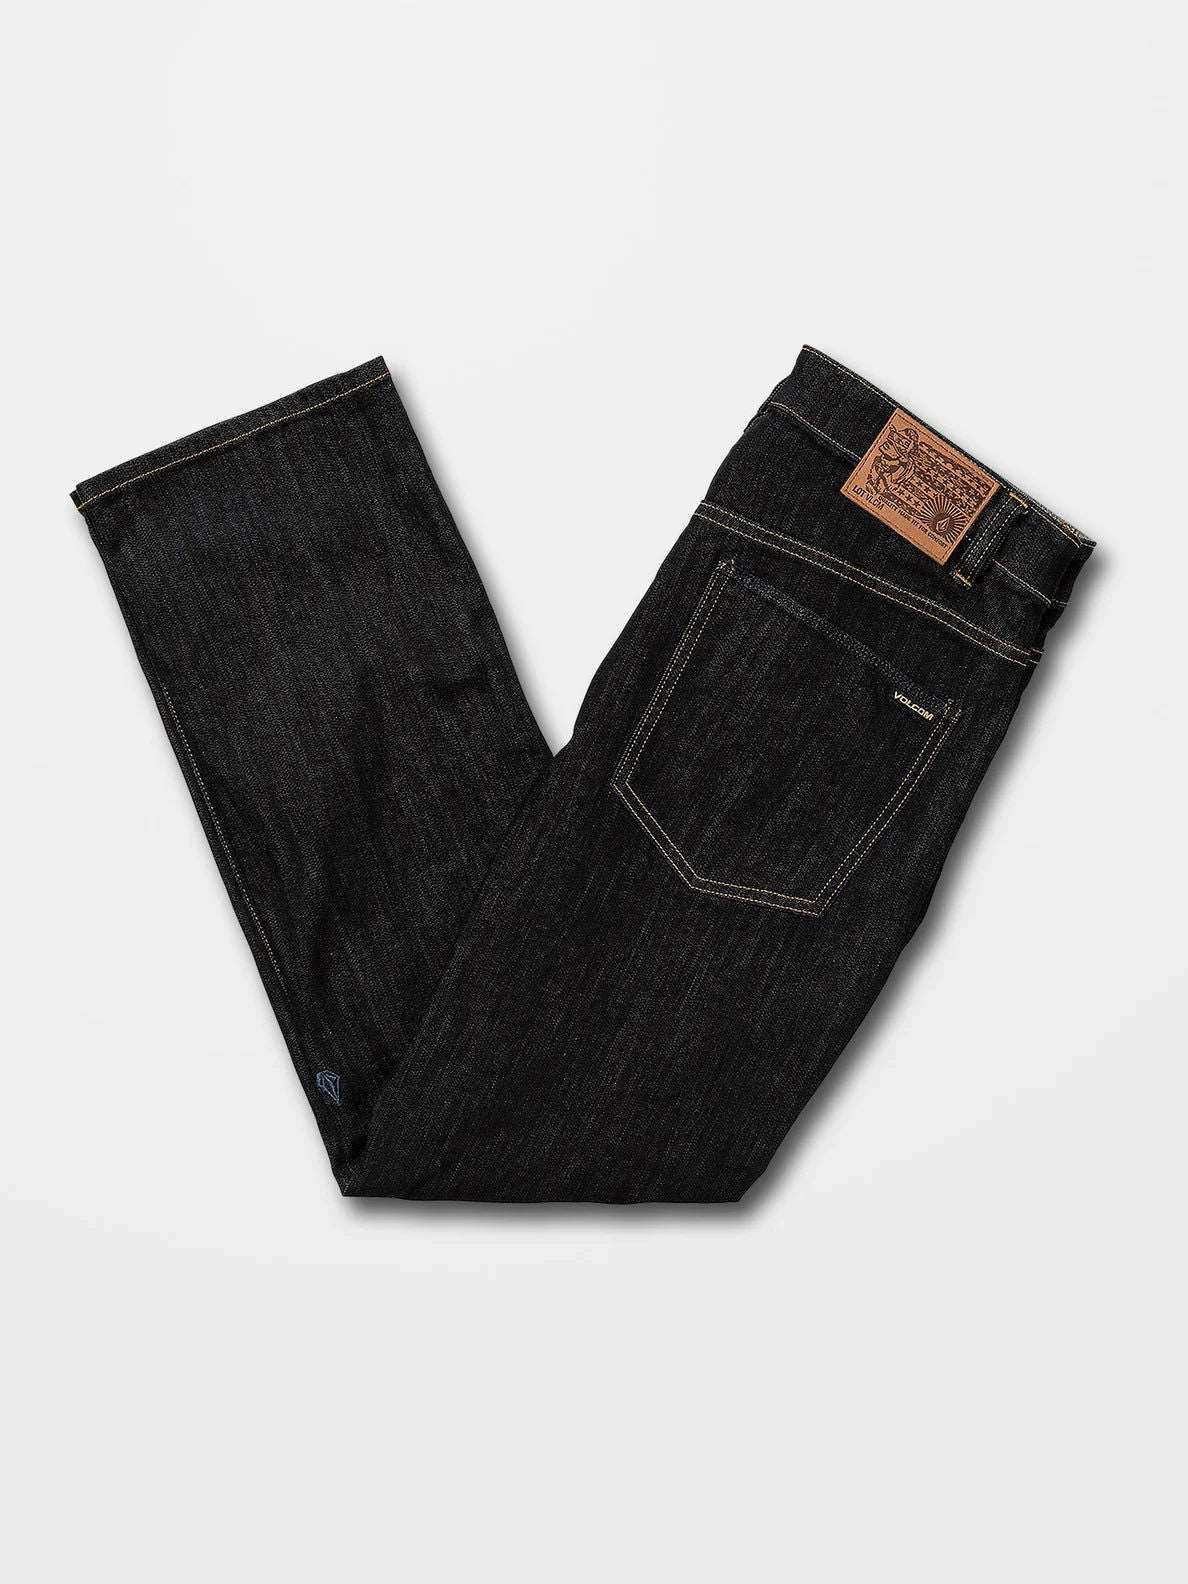 Volcom - Solver Denim Jeans | Rinsed -  - Married to the Sea Surf Shop - 